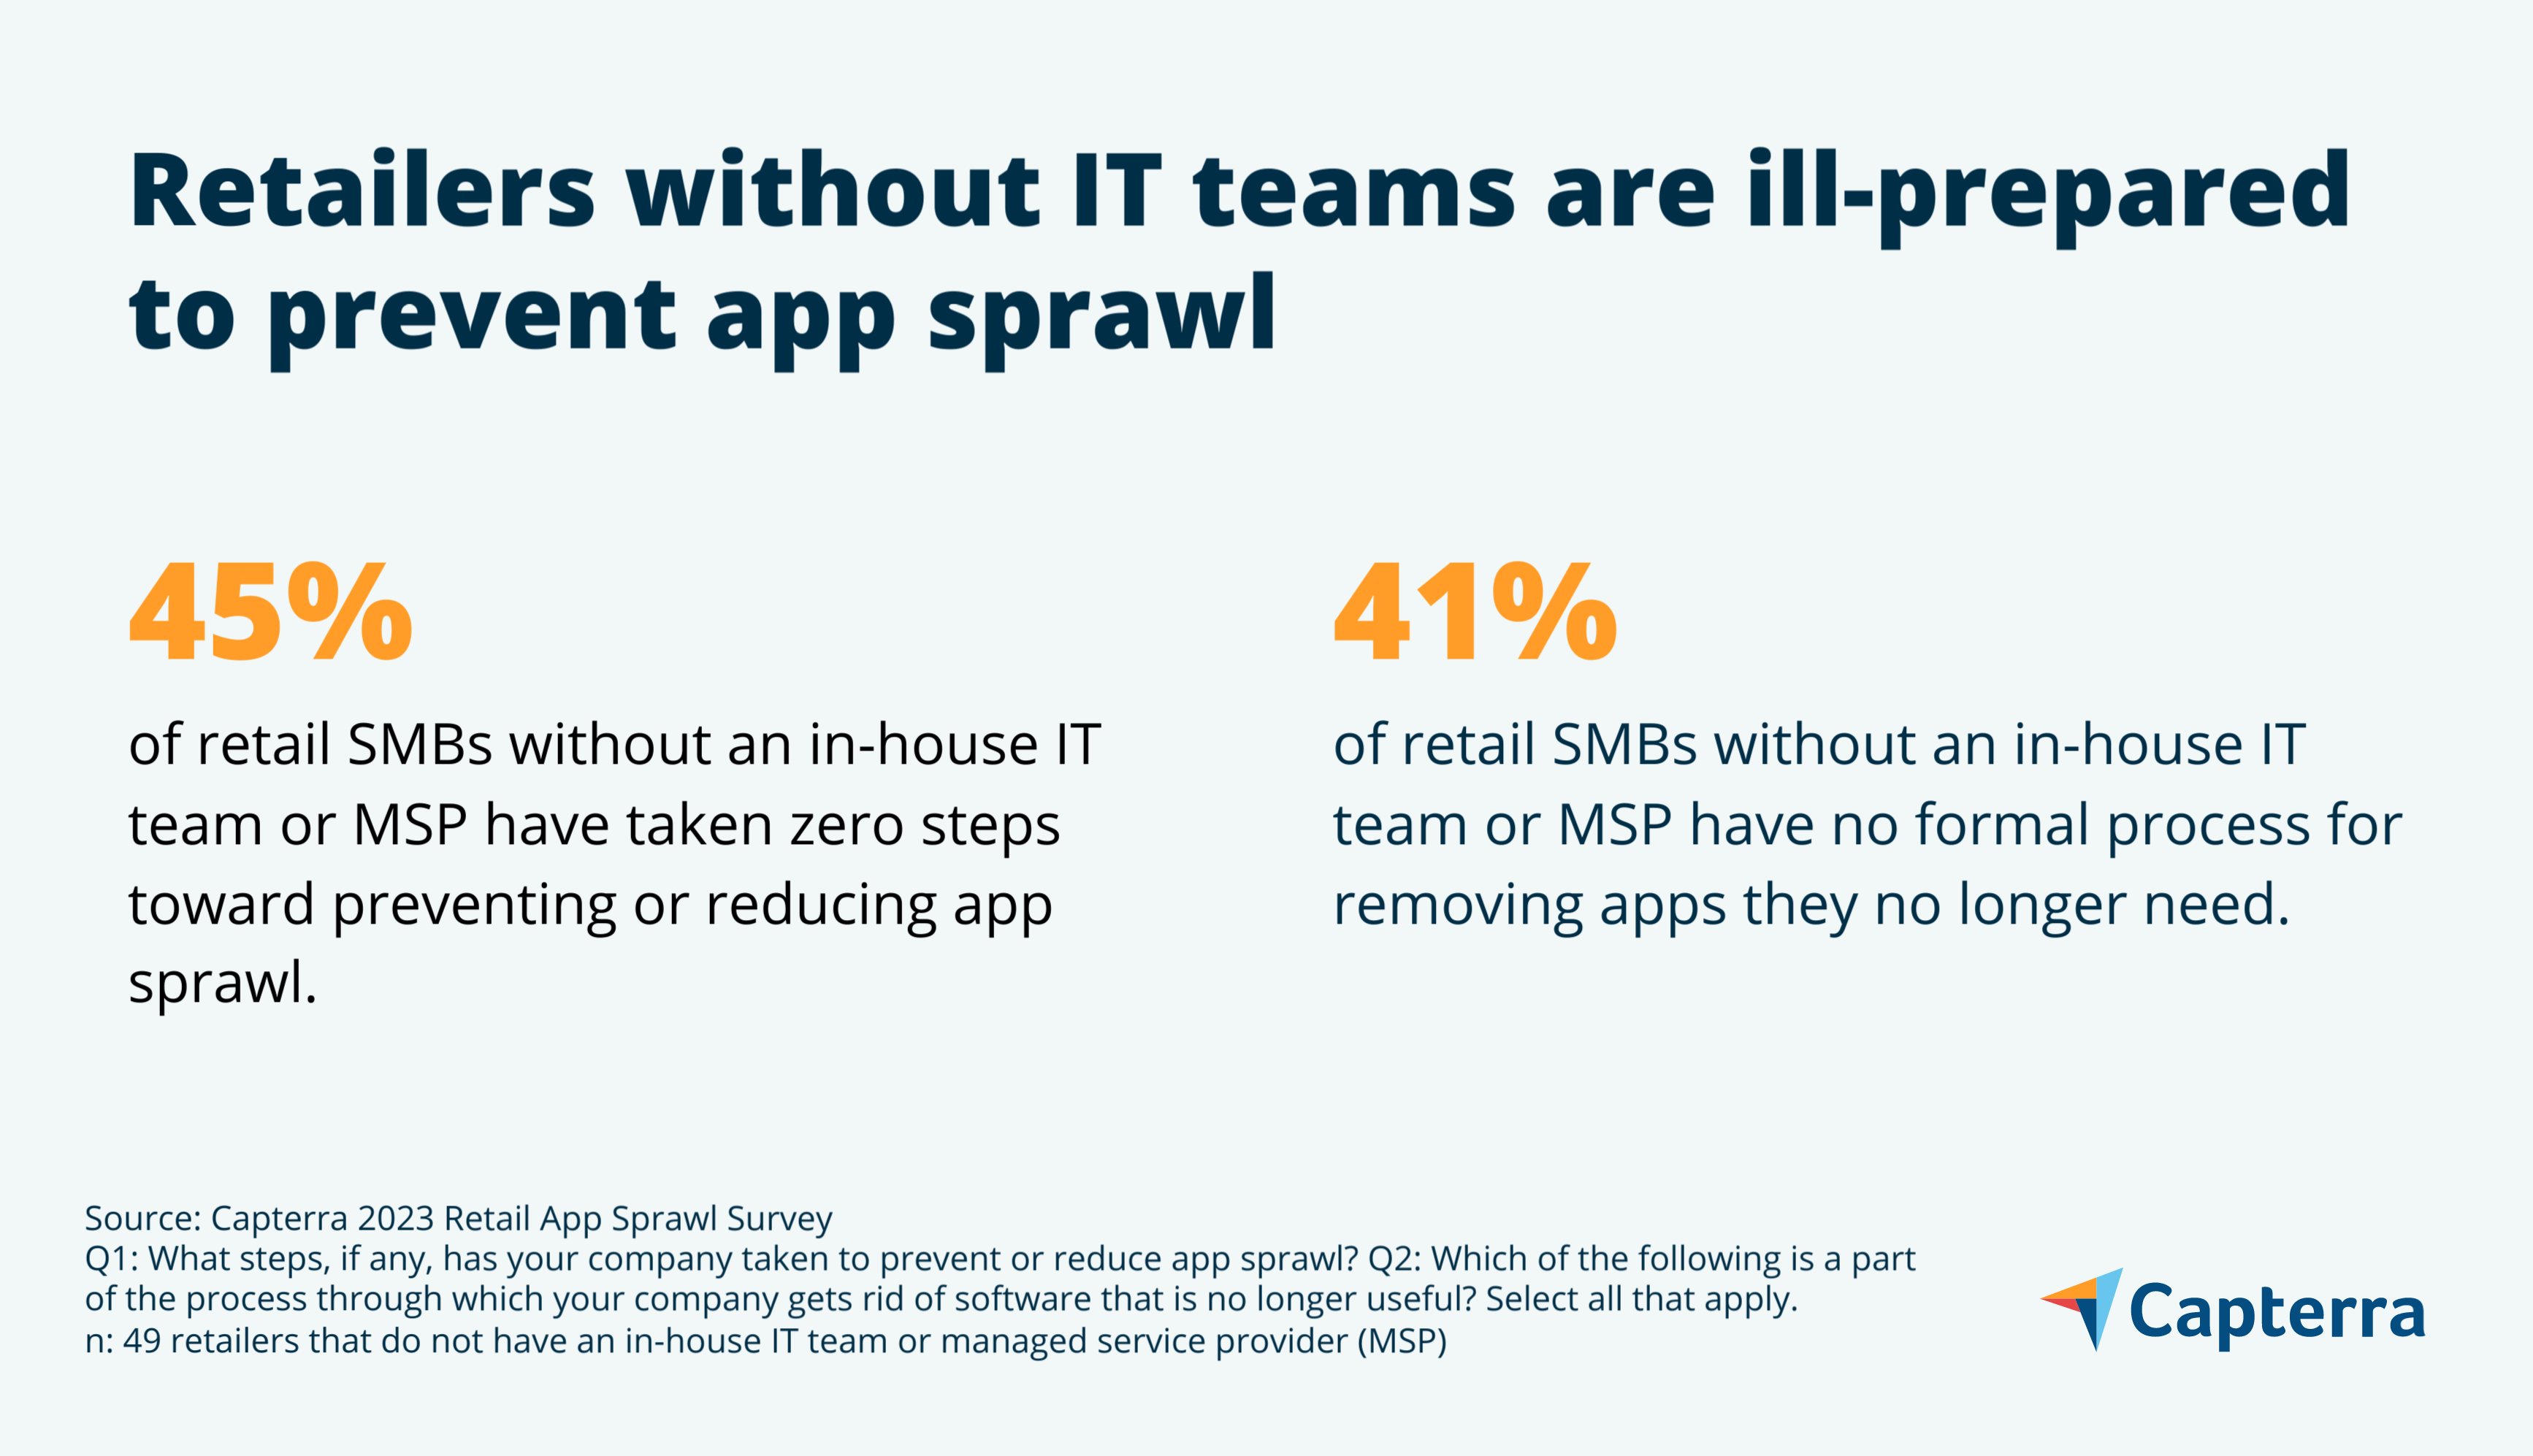 Teams without IT are ill-prepared to prevent app sprawl graphic for the blog article "More Money, More App Sprawl Problems: The Impact of Software Sprawl on Retail SMBs and How to Prevent It"